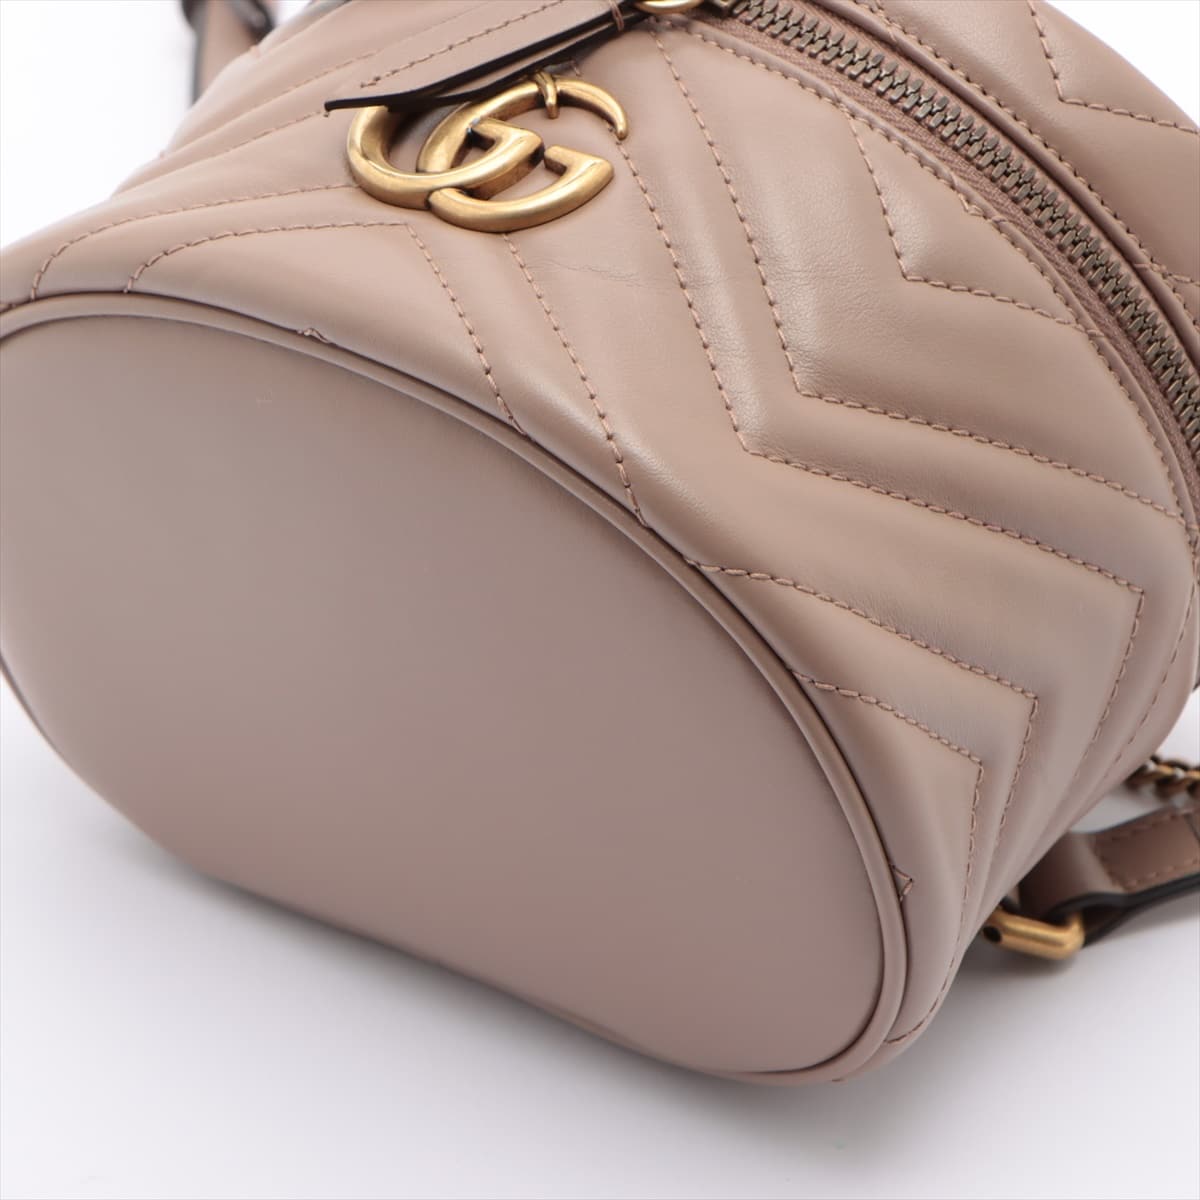 Gucci GG Marmont Leather Backpack Beige 598594